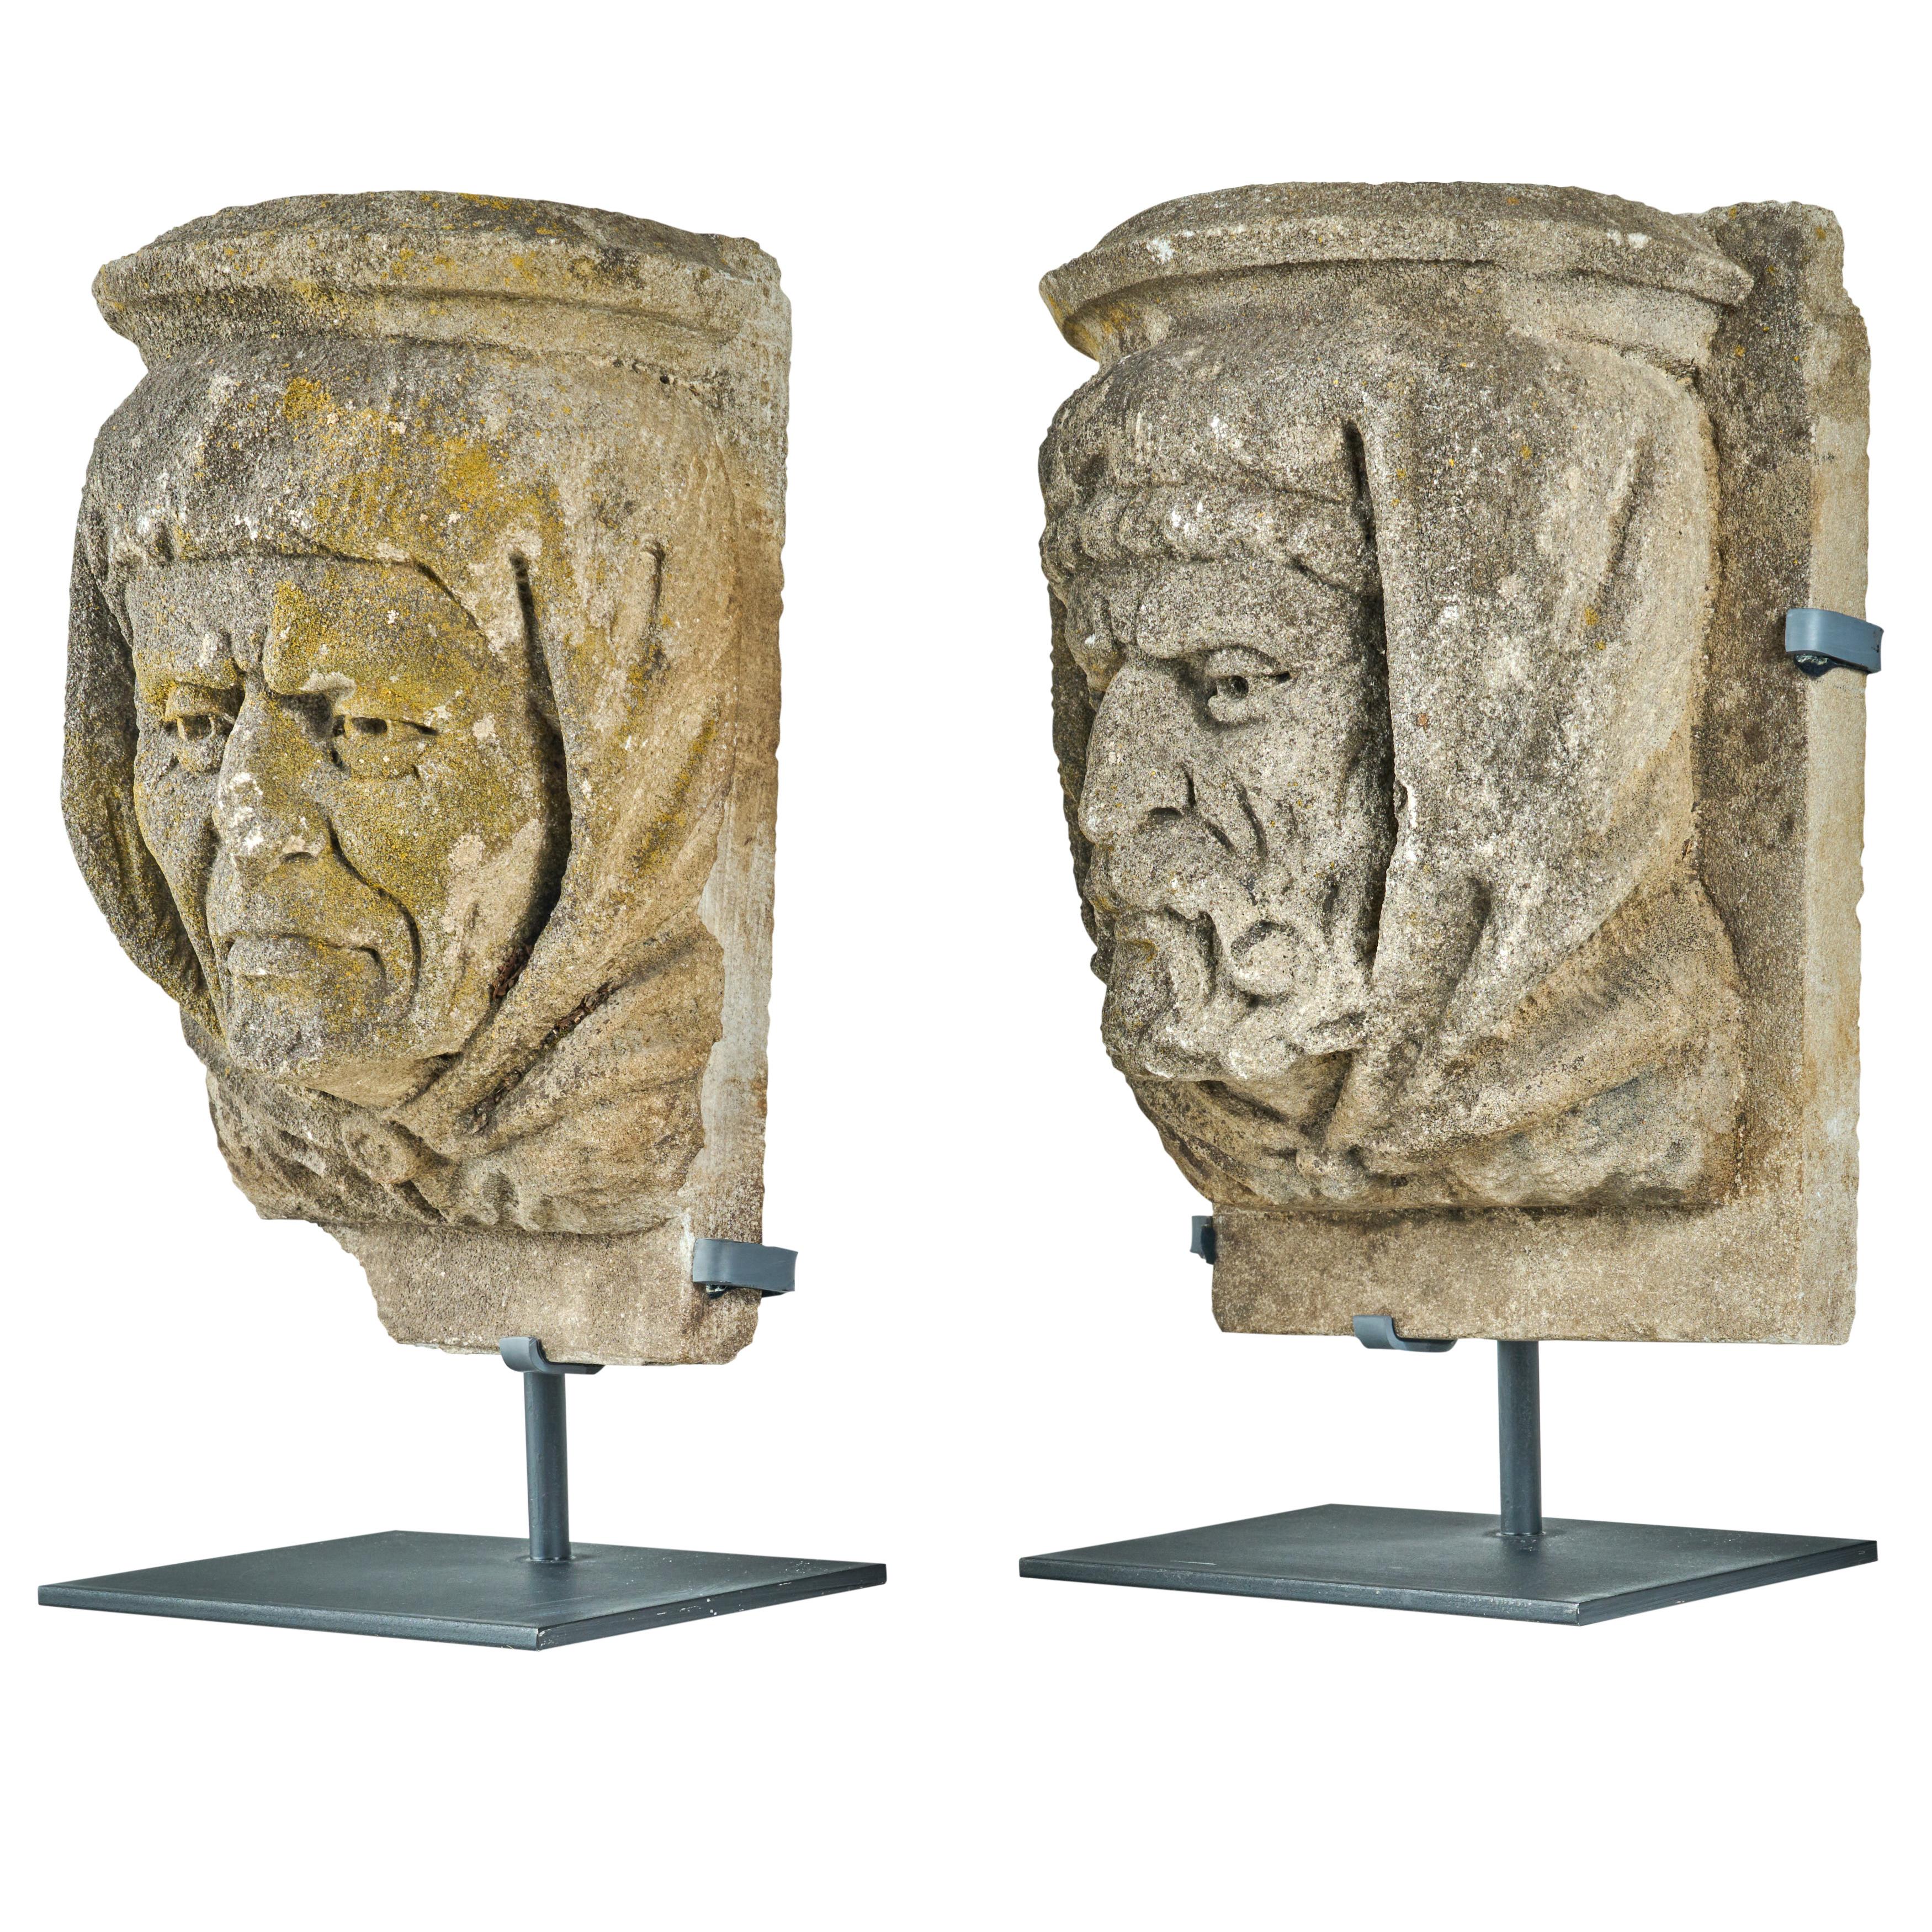 Pair of carved limestone heads from a Chicago Hospital. Heads depict ancient medical practitioners. Custom iron mounts are recently made.
